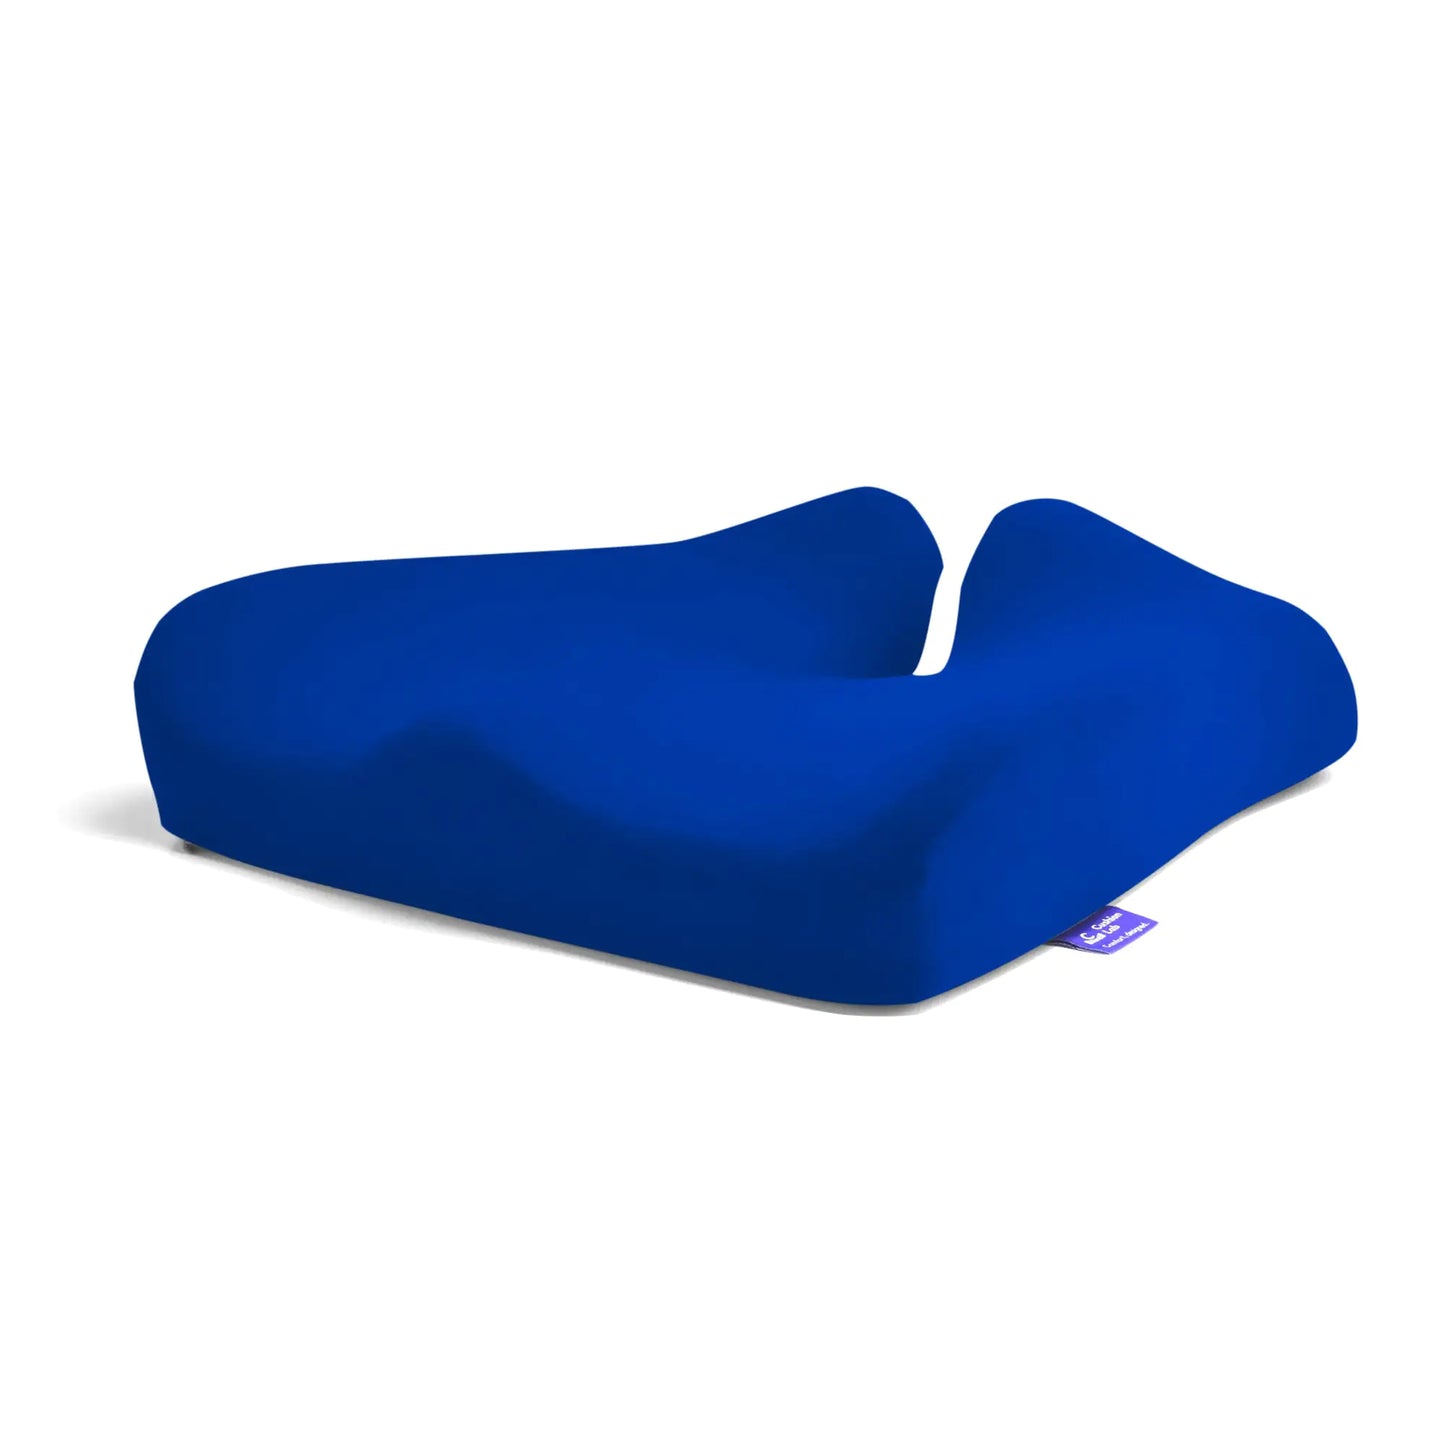 Ergonomic Pressure Relief Seat Cushion - Enhance Your Sitting Experience Anywhere